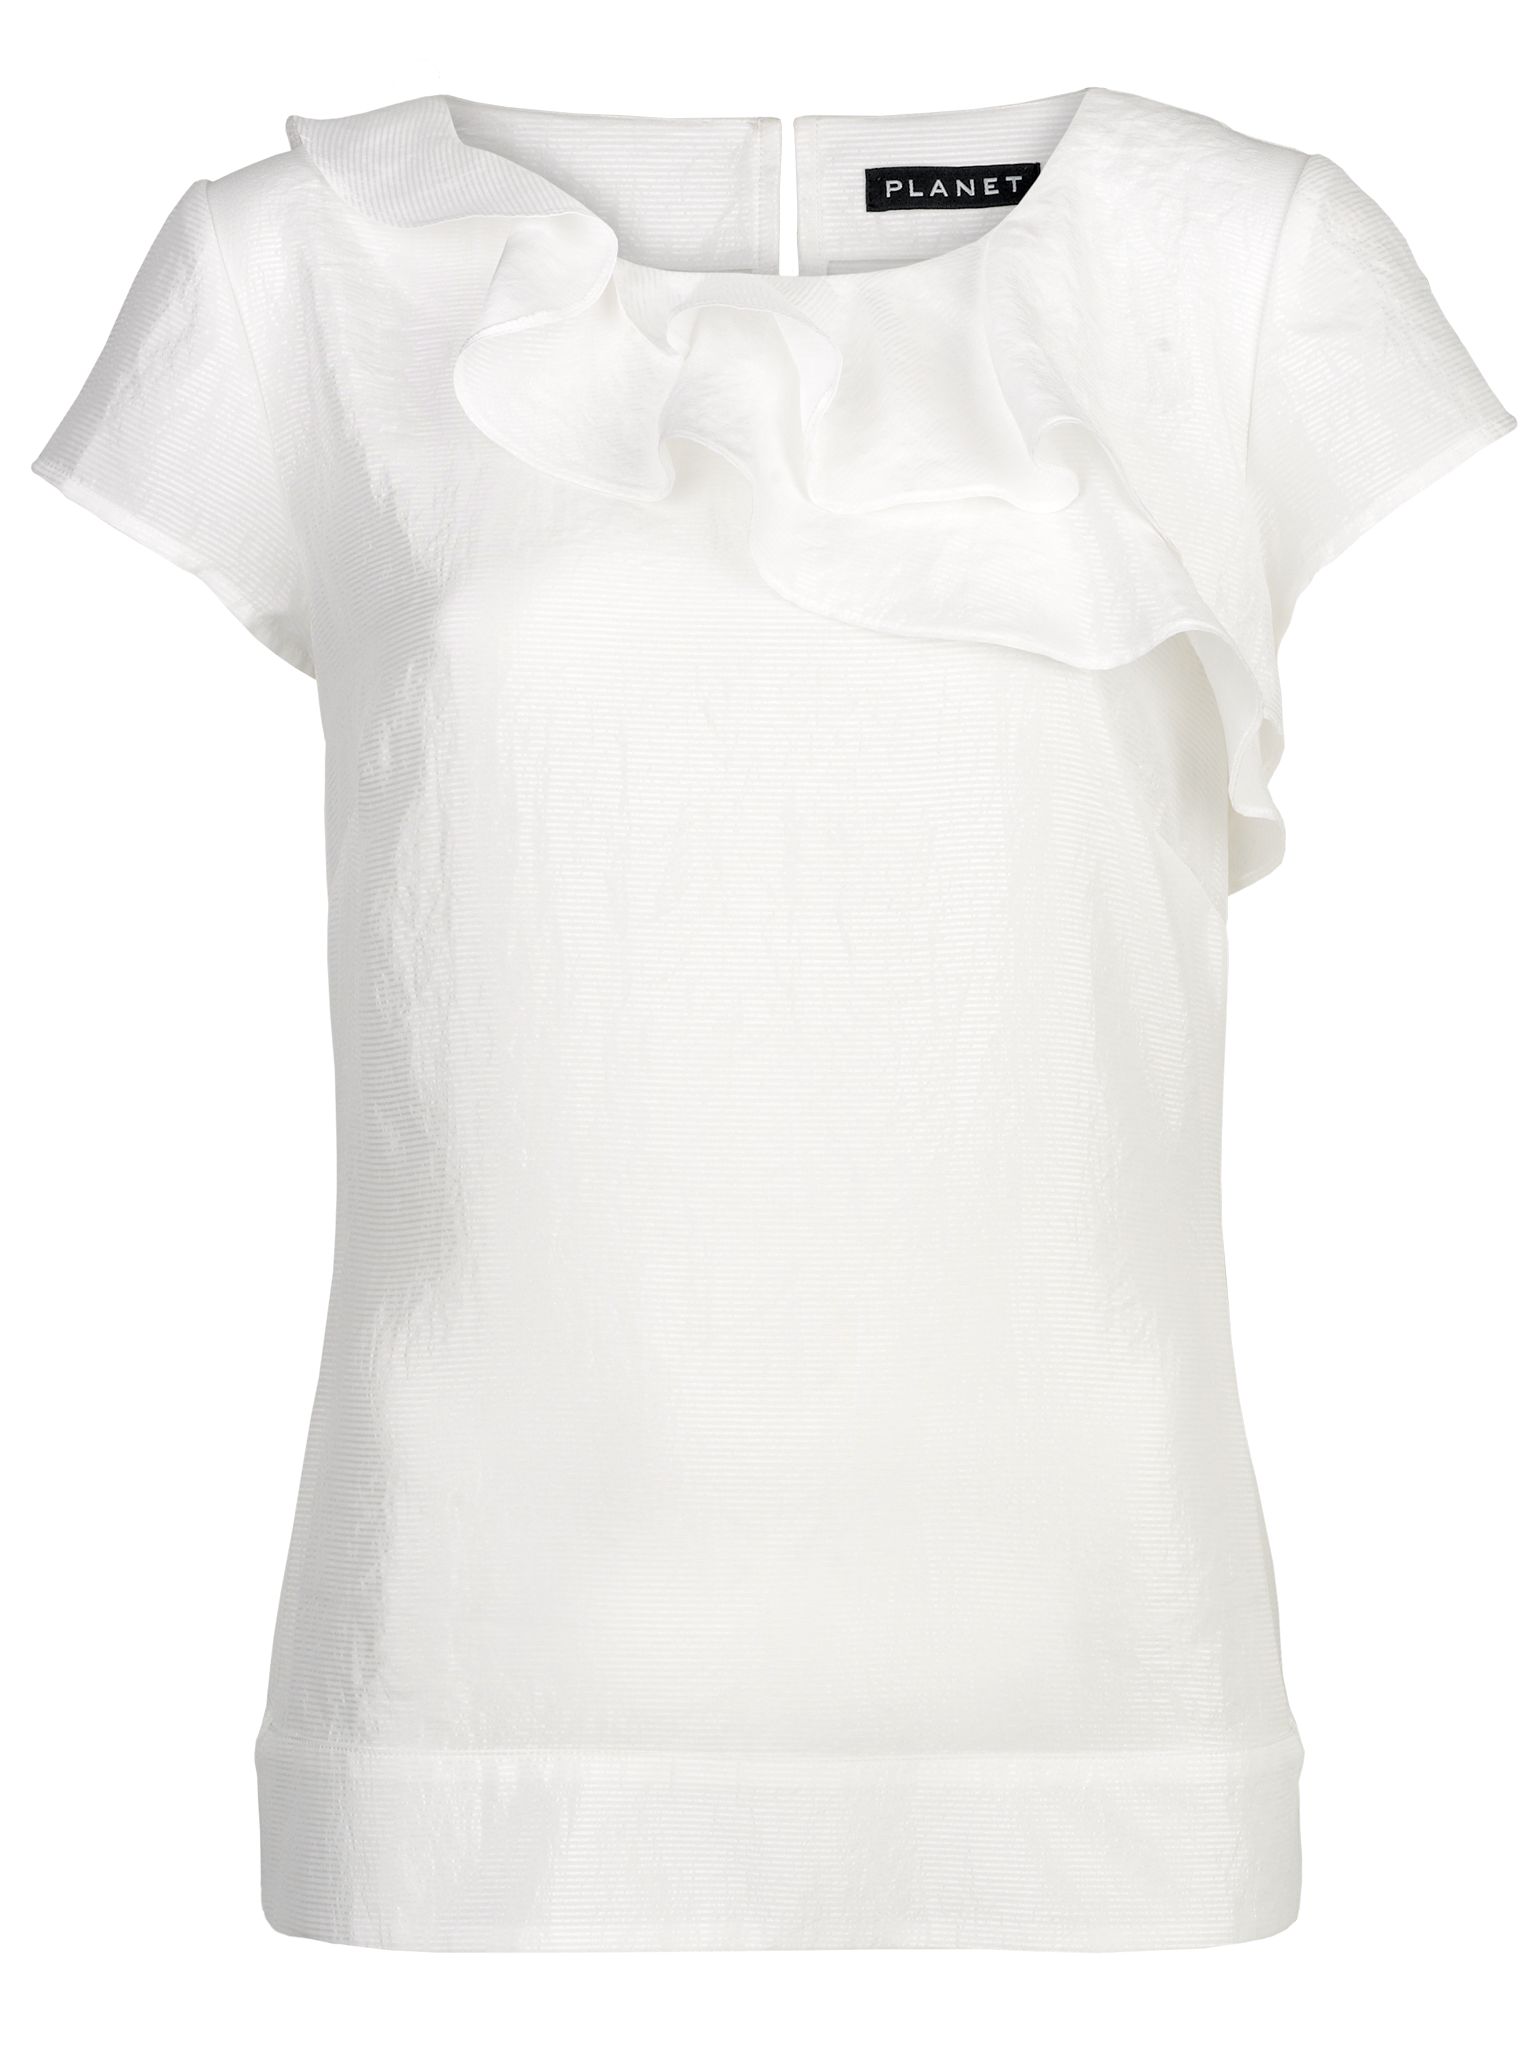 Planet Ivory Frill Front Blouse, Ivory